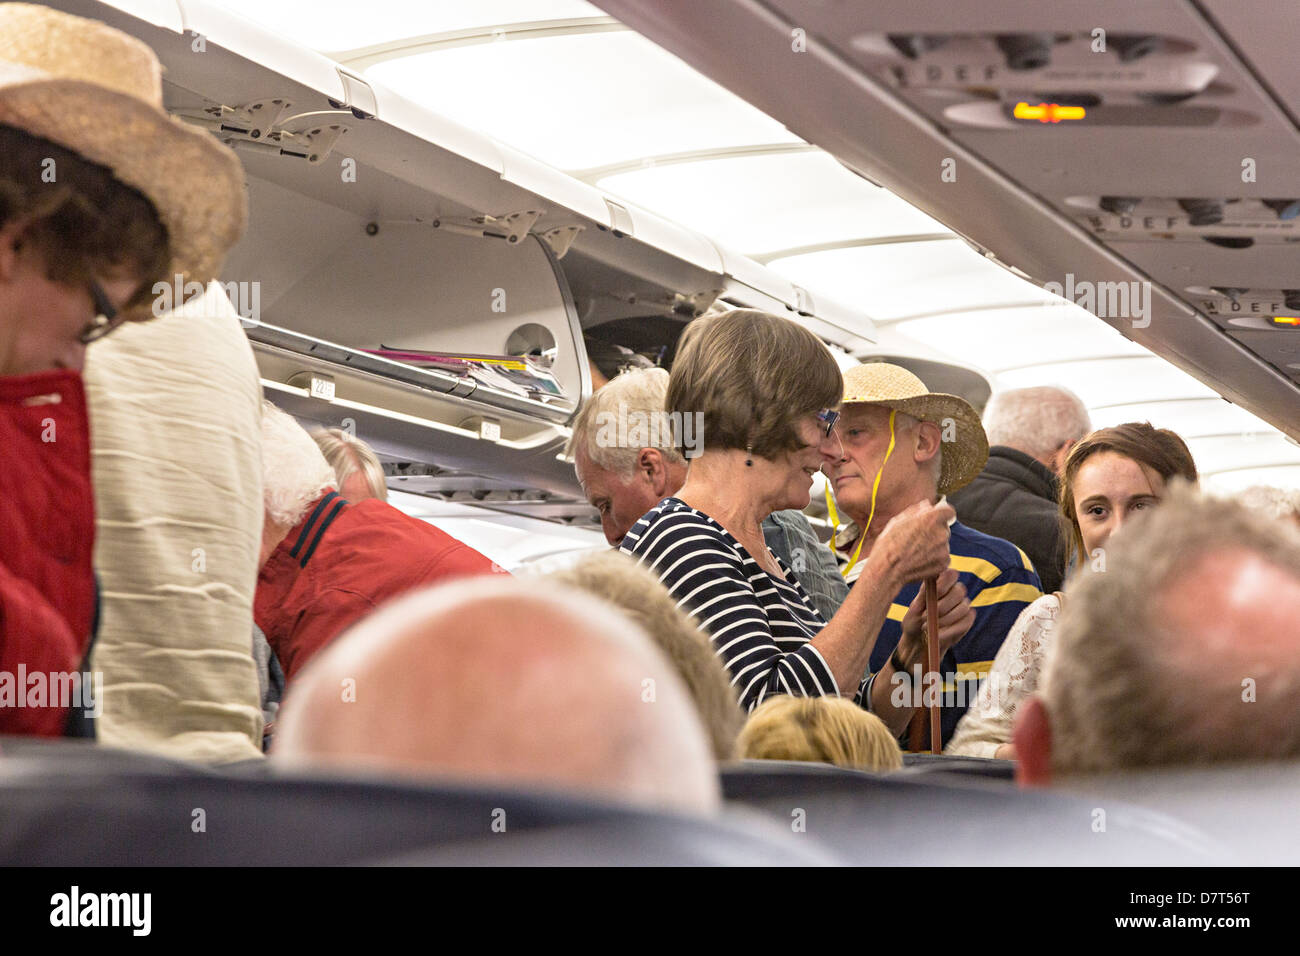 Crush of people on aircraft standing while waiting to disembark, Bristol, UK Stock Photo